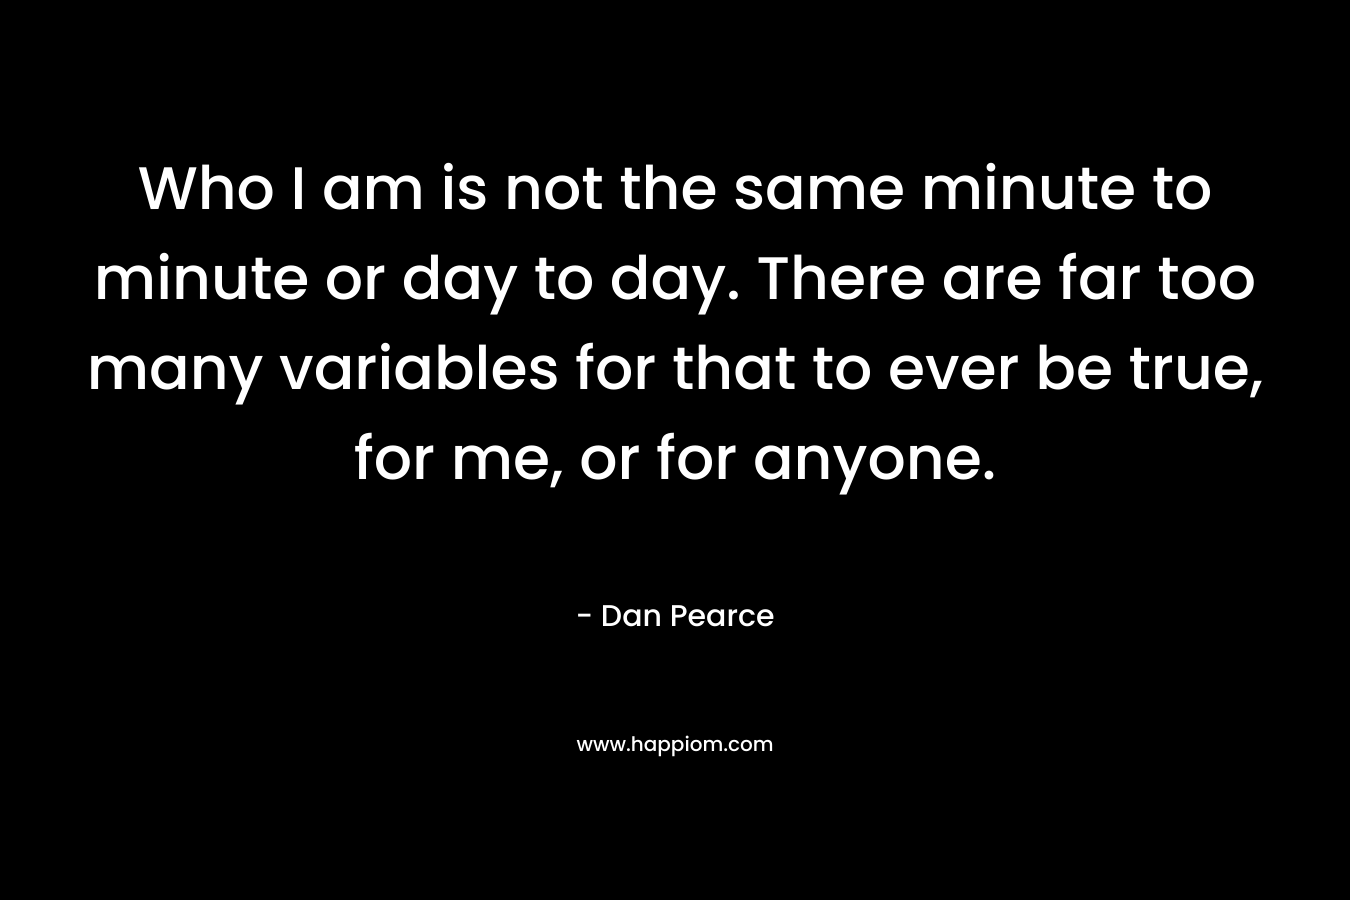 Who I am is not the same minute to minute or day to day. There are far too many variables for that to ever be true, for me, or for anyone.